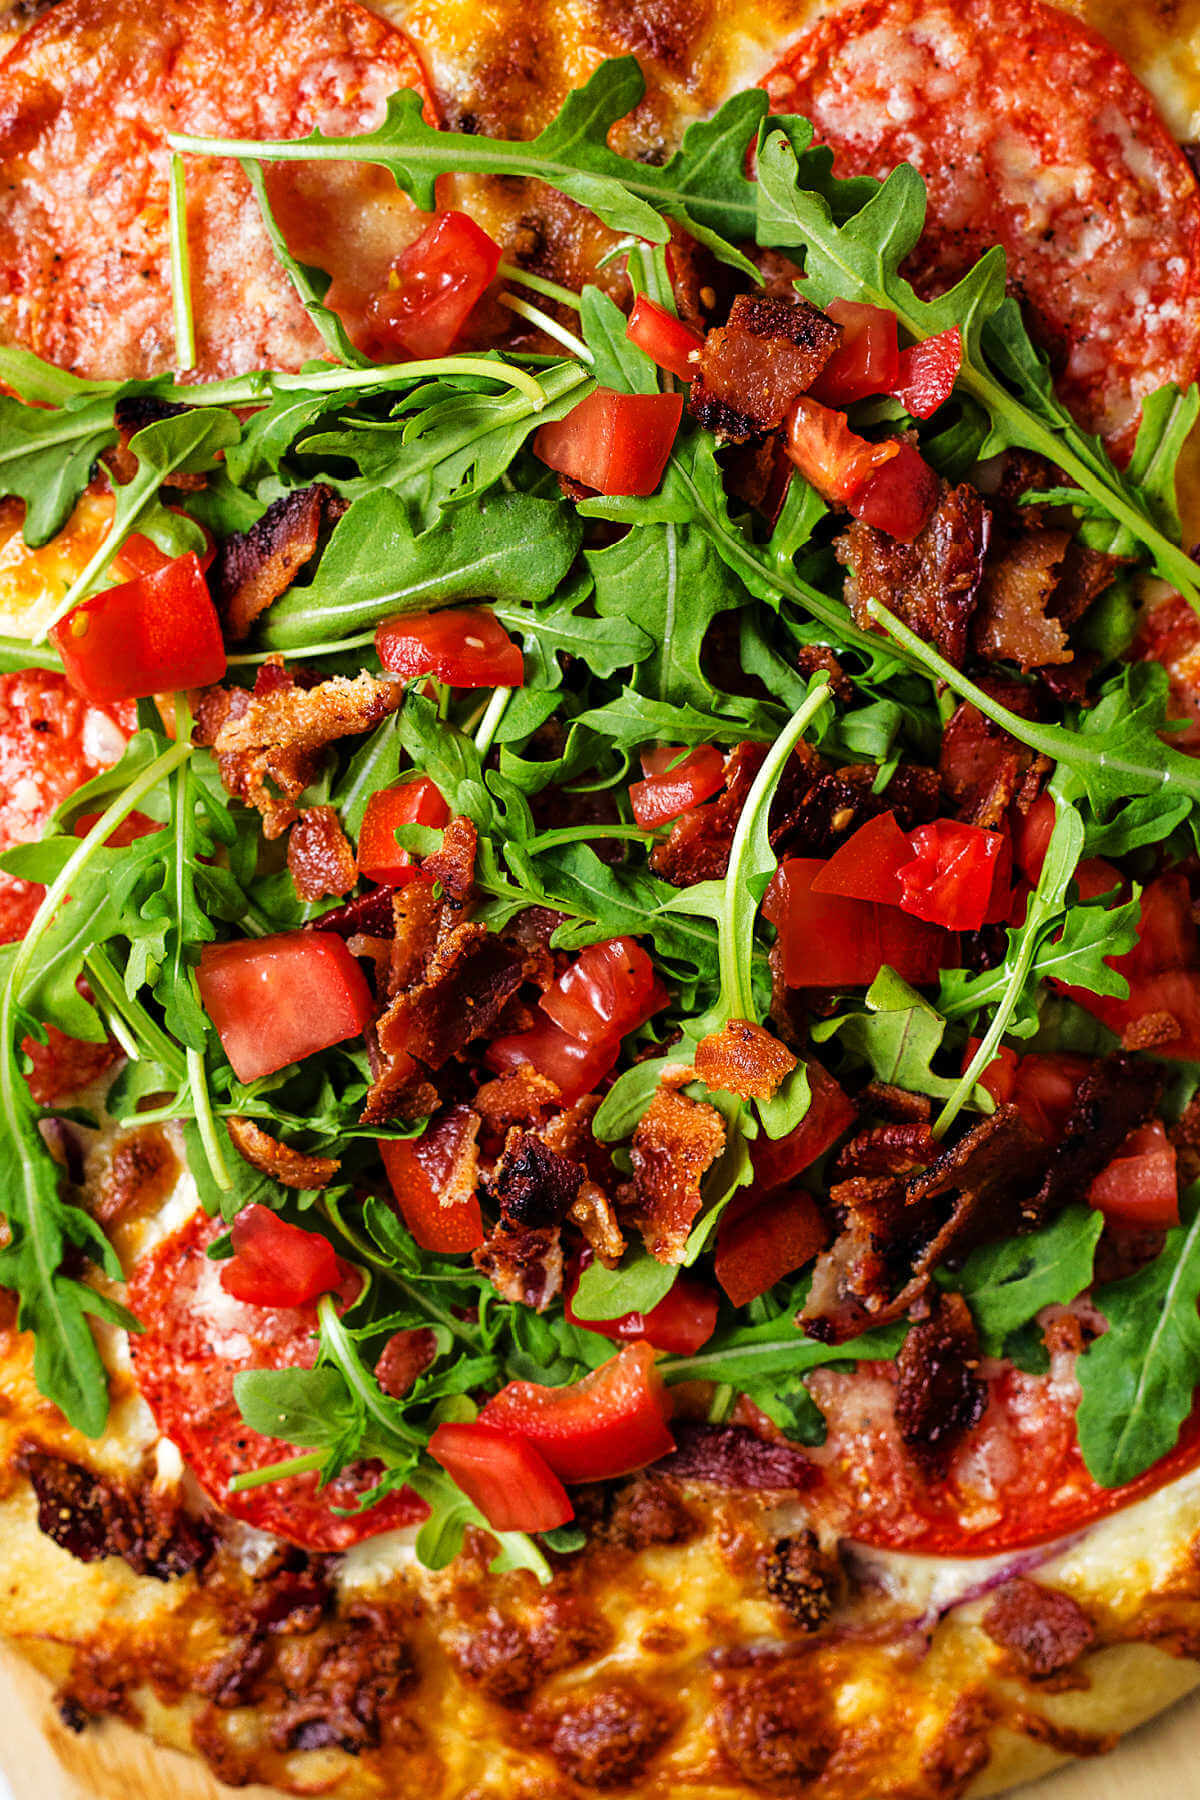 BLT pizza topped with baby arugula, bacon, and chopped tomatoes.